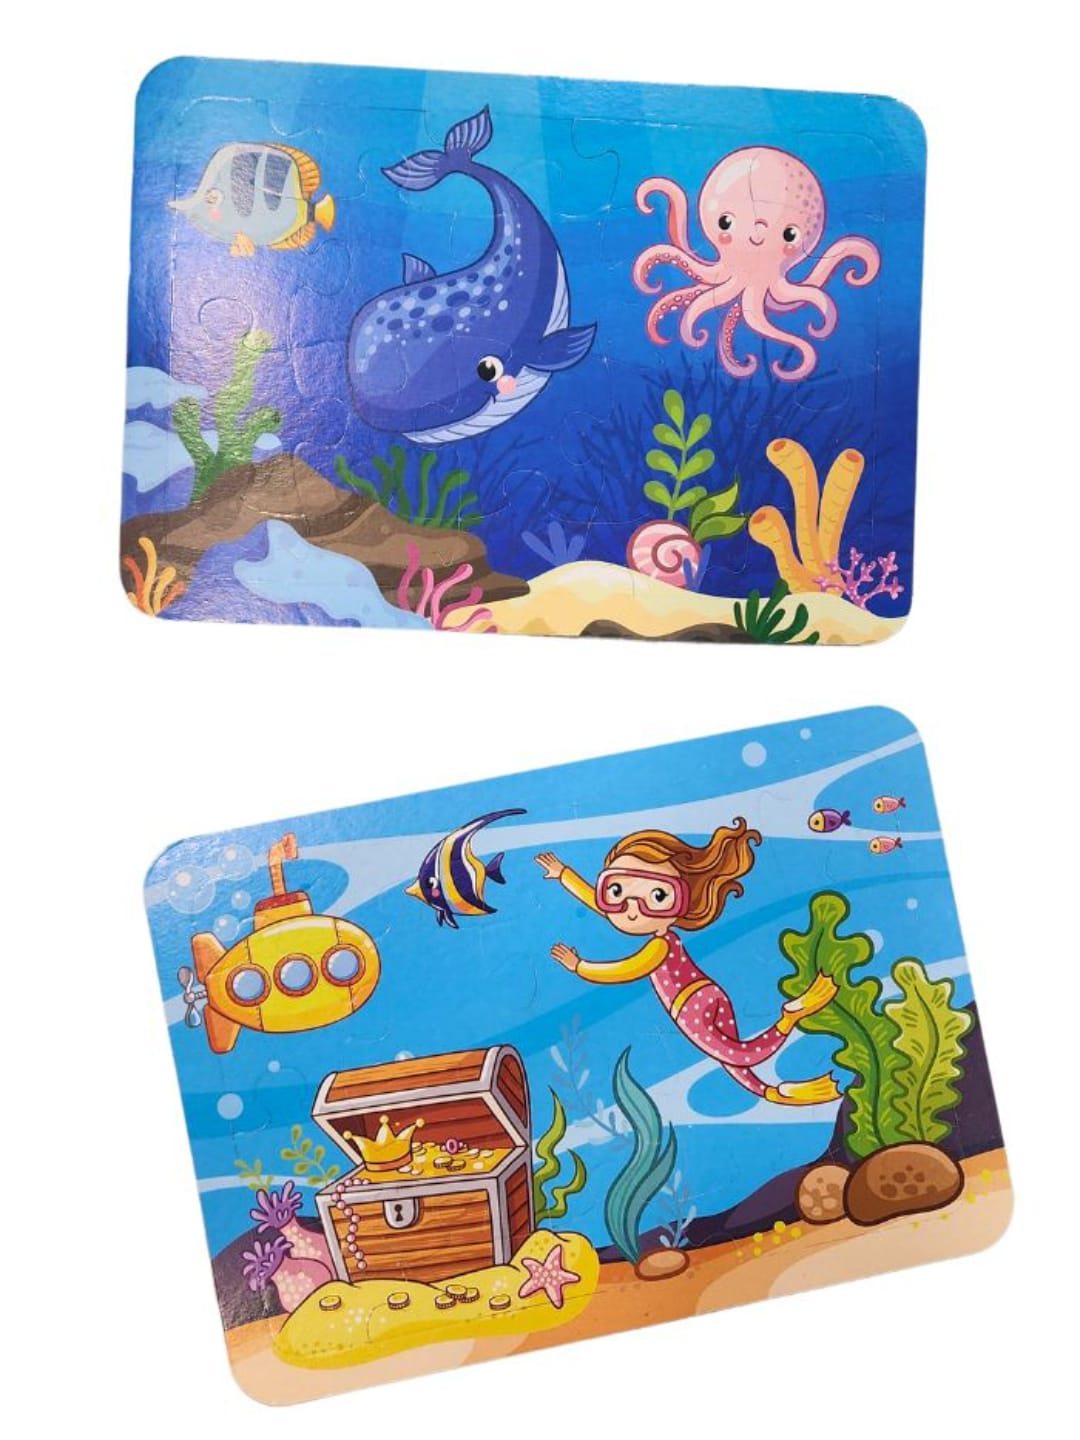 2 in 1 Puzzle + Water Painting with 4 puzzles- Underwater Theme